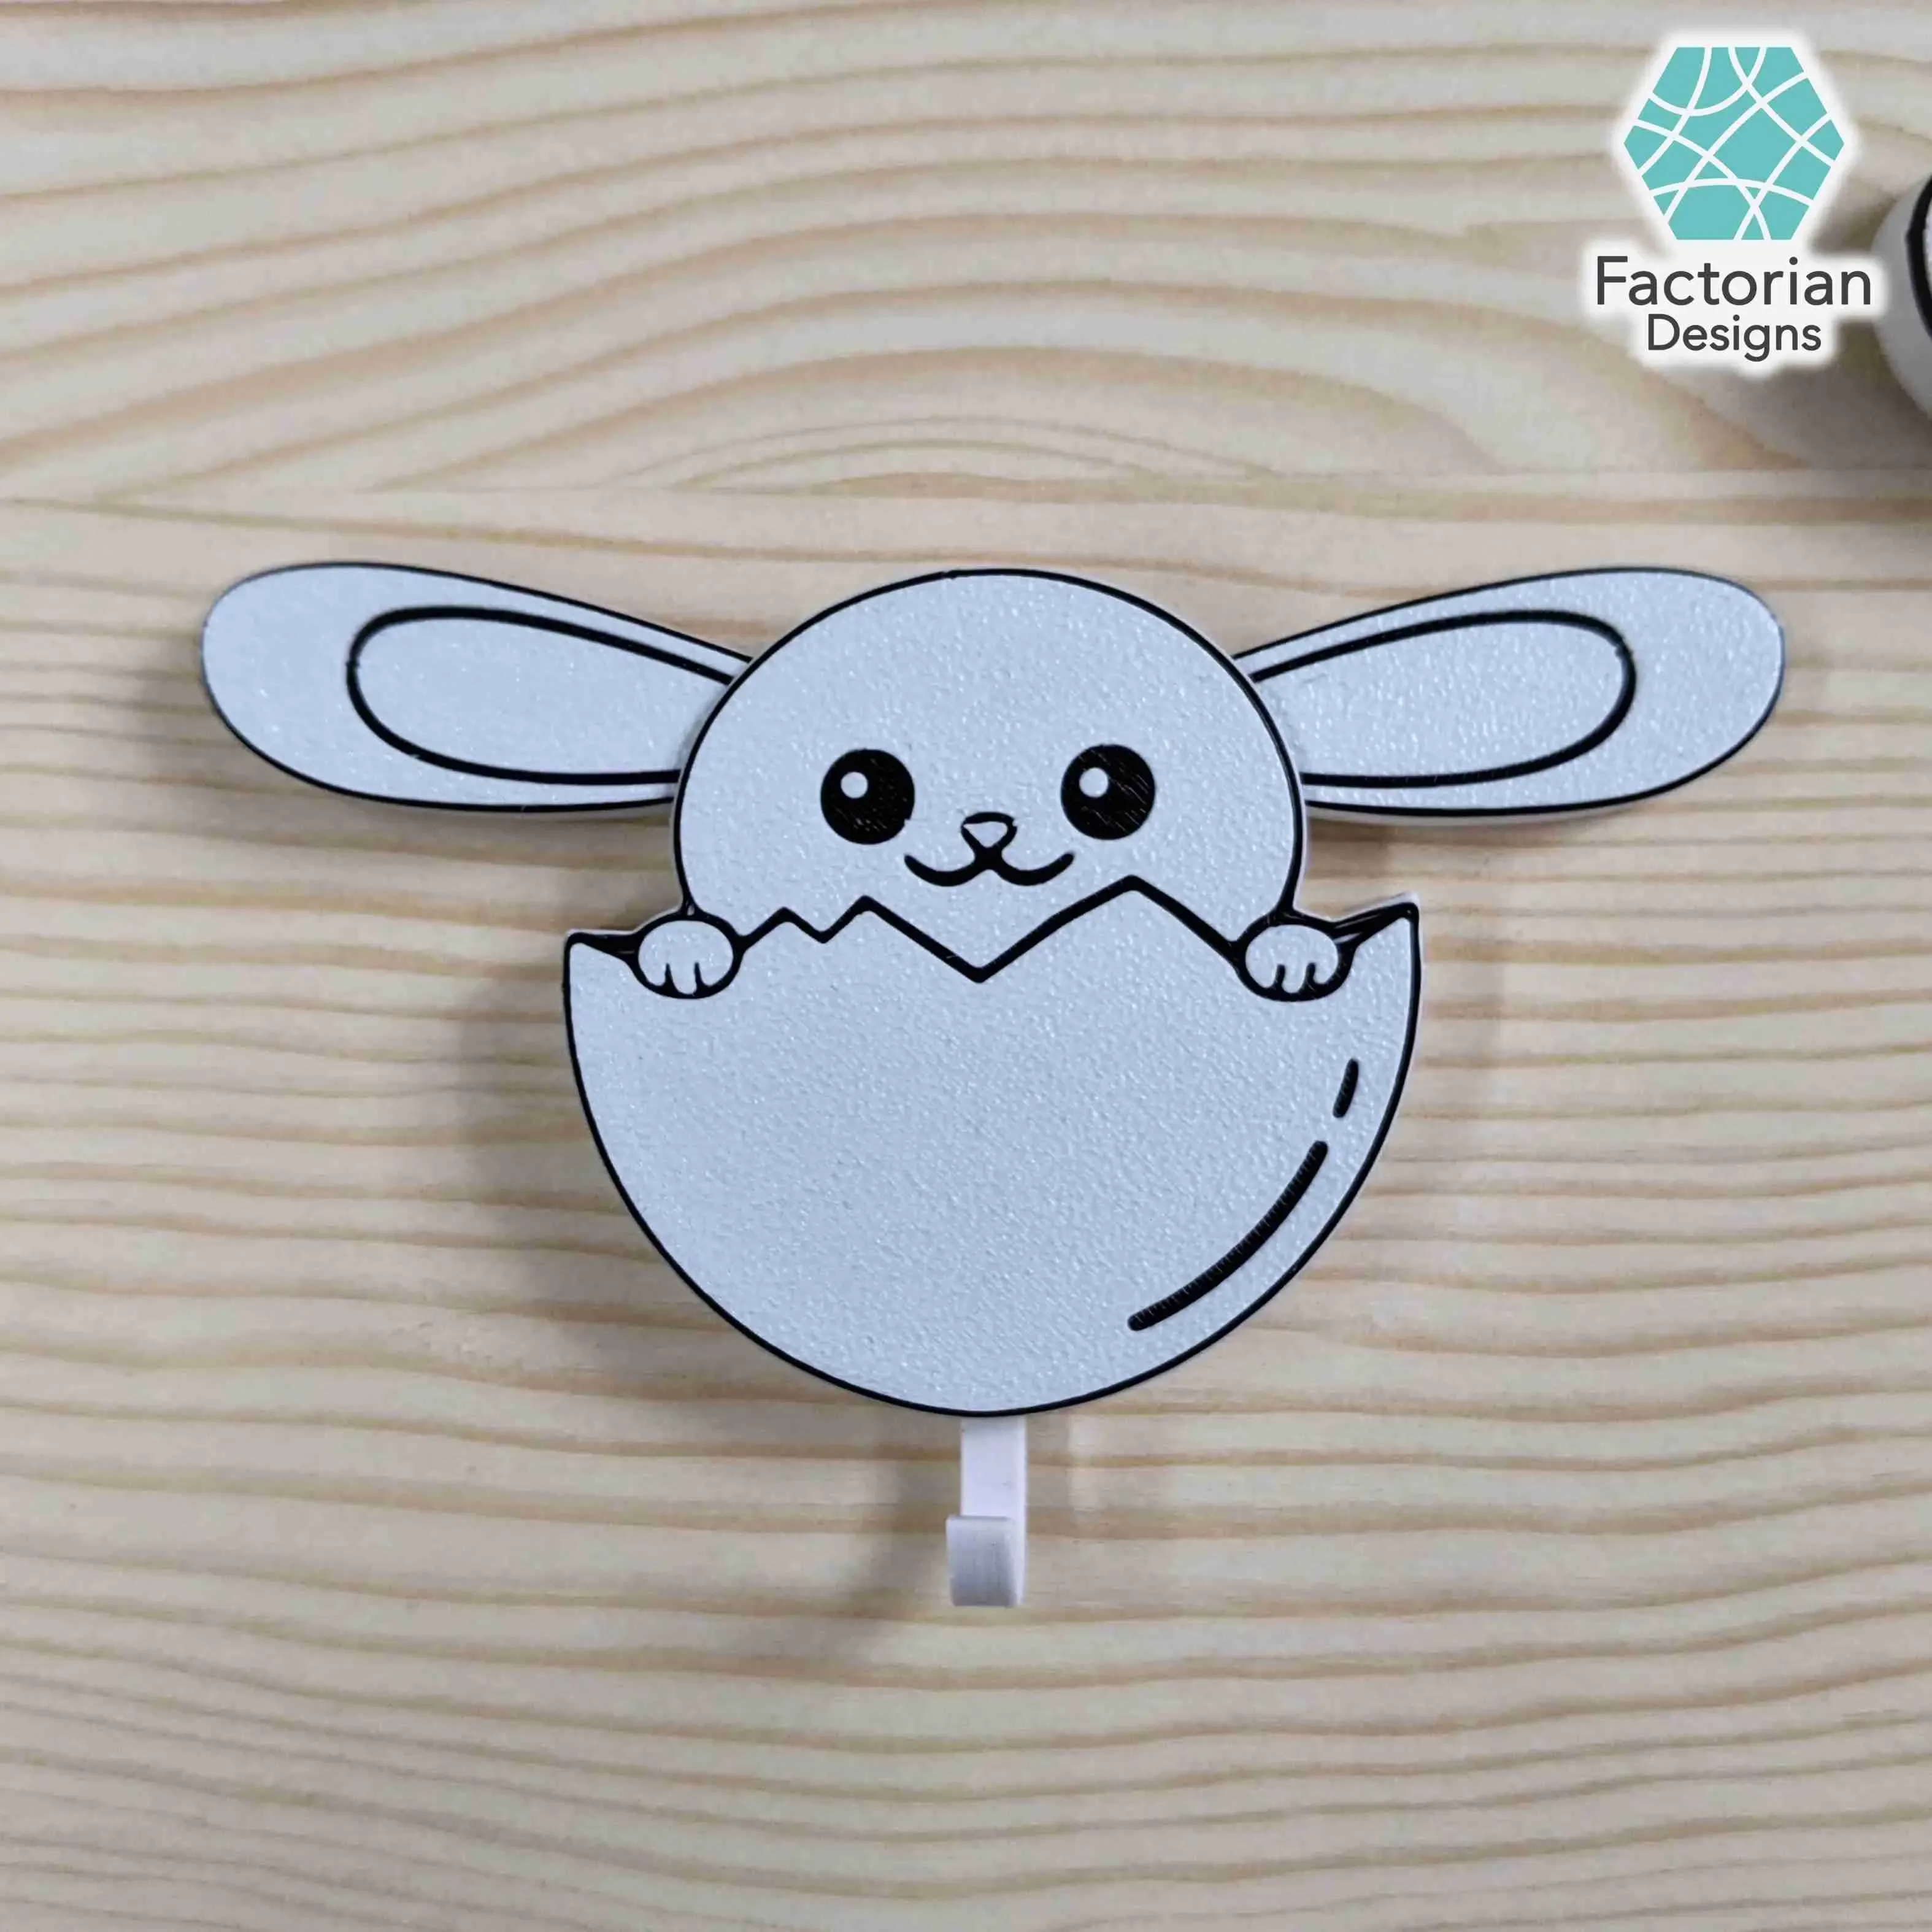 WALL KEY HOLDER - FUNNY AND CUTE BUNNEY KEY HANGER